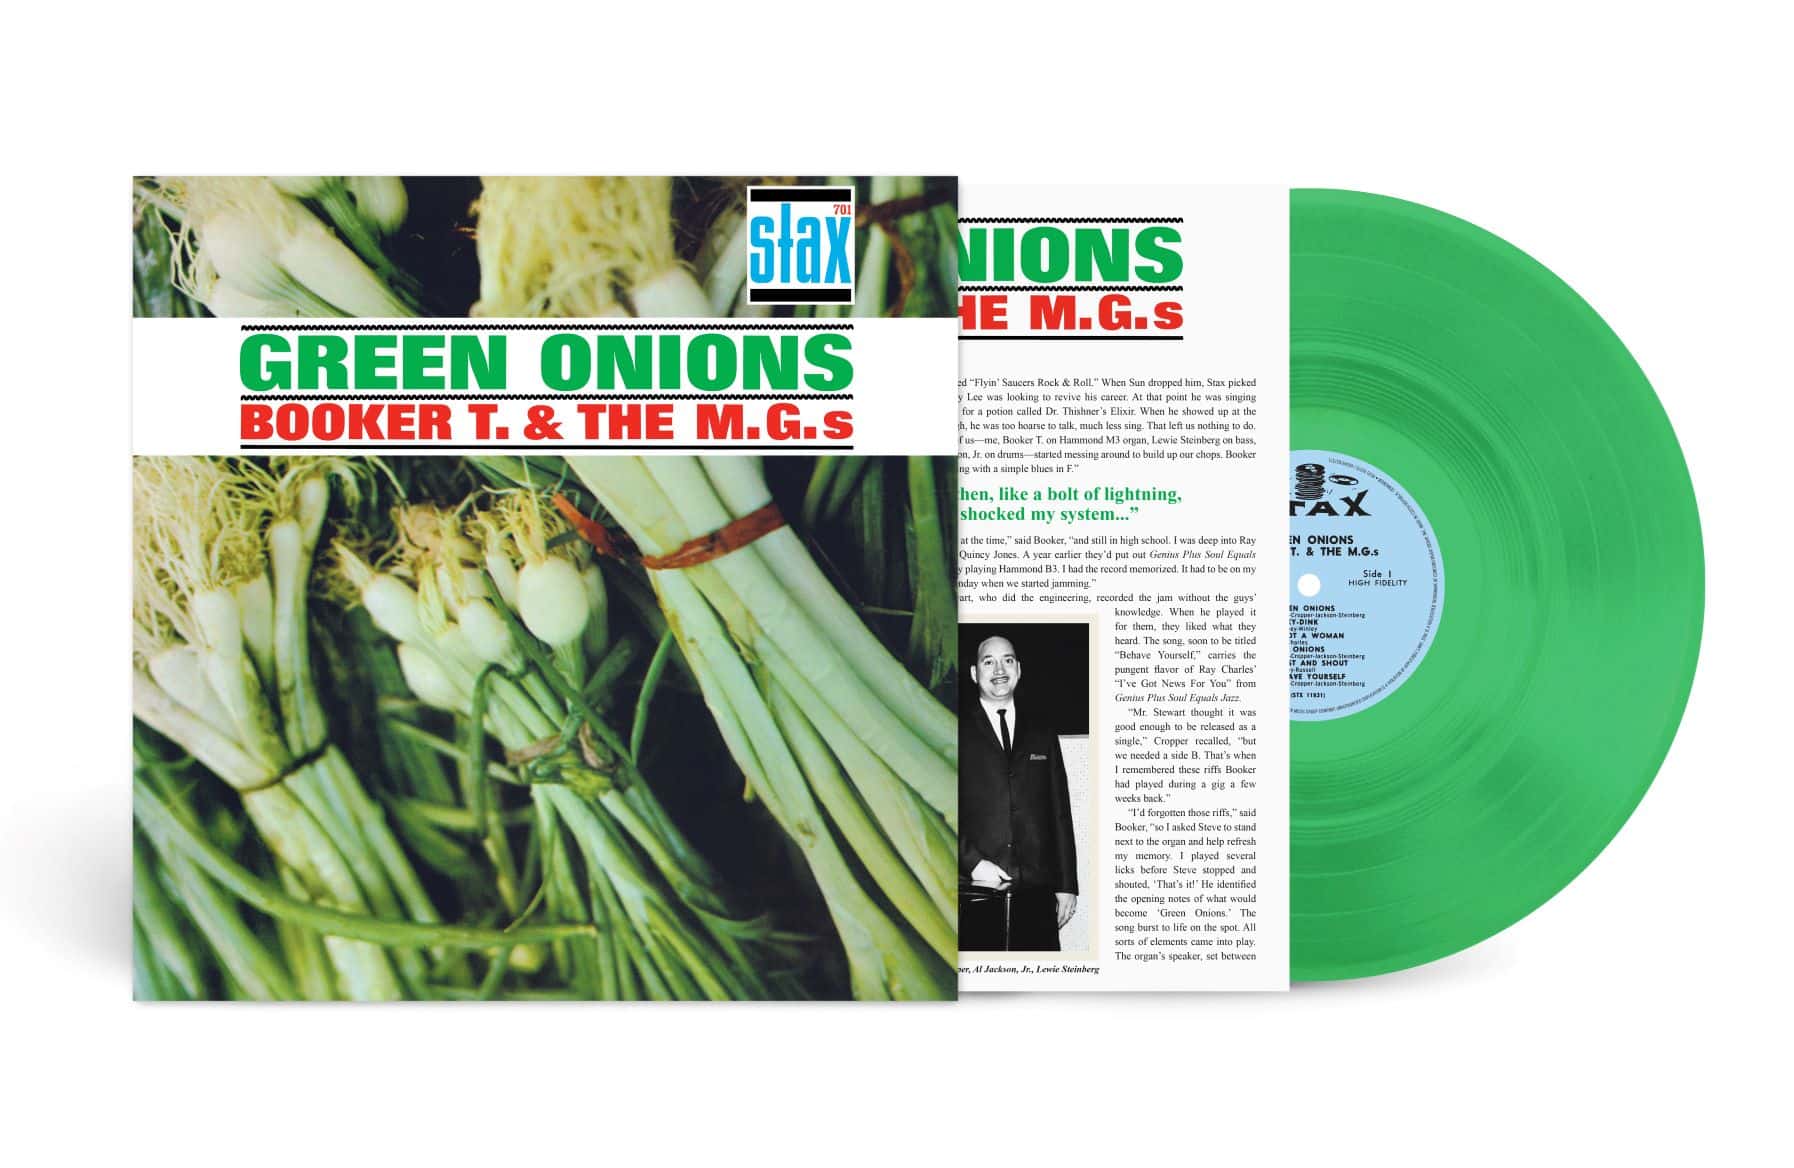 Booker T. & The M.G.s - Green Onions 60th Anniversary